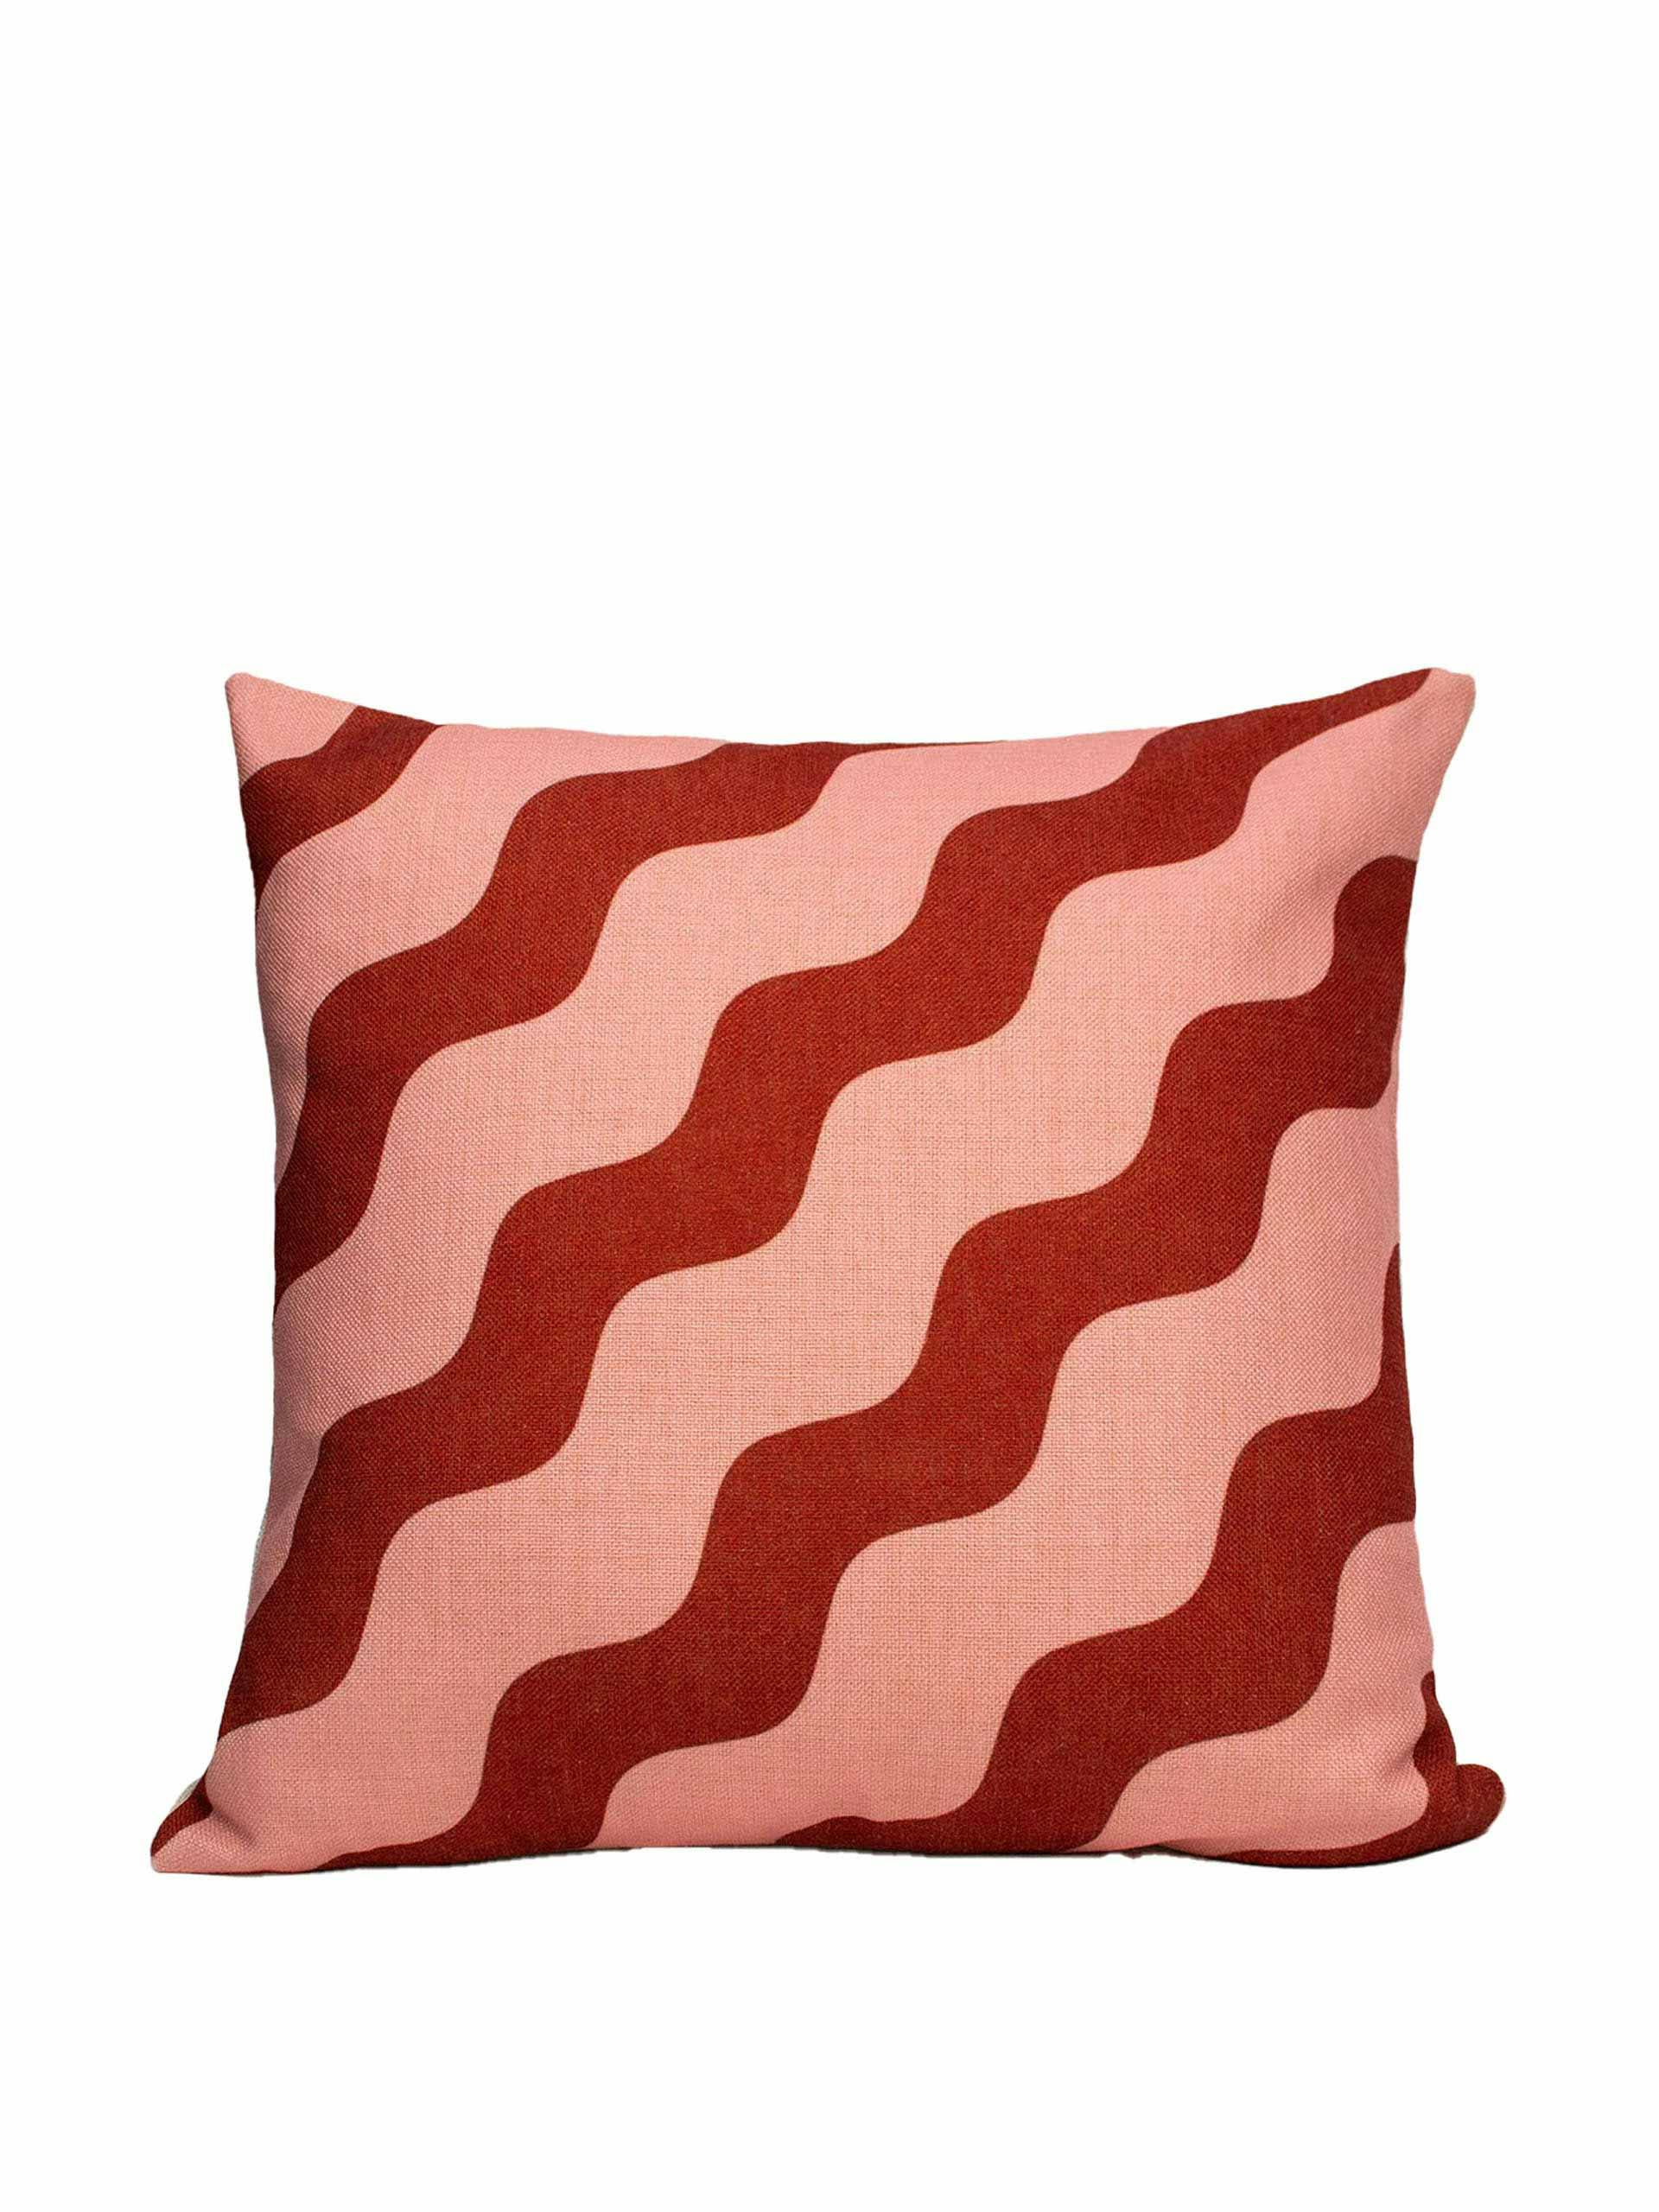 Pink & red linen cushion